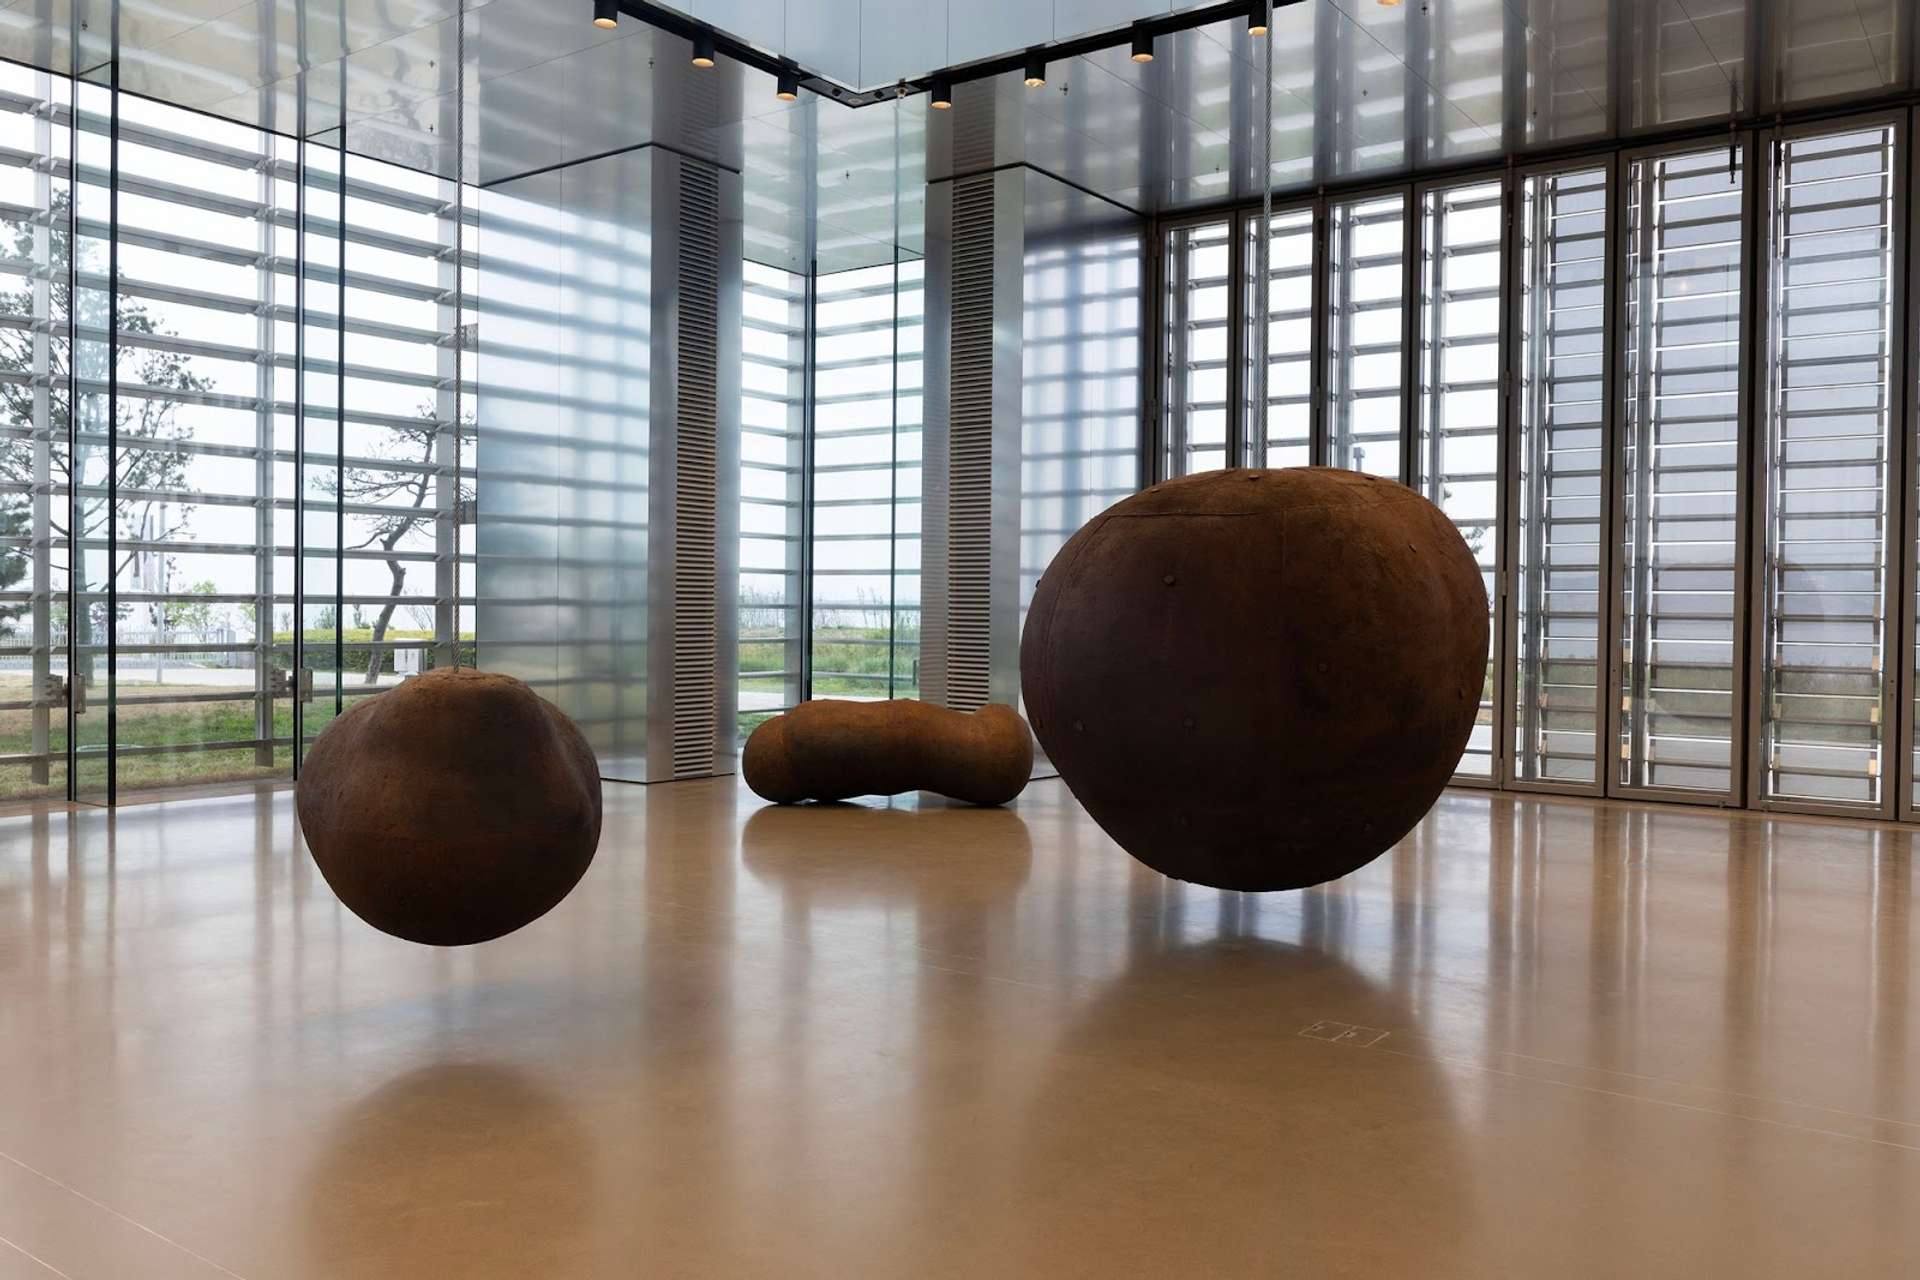 An image of the exhibition Living Time by Antony Gormley. It shows a large room, with glass windows, in which iron-like spheres seem to fluctuate.